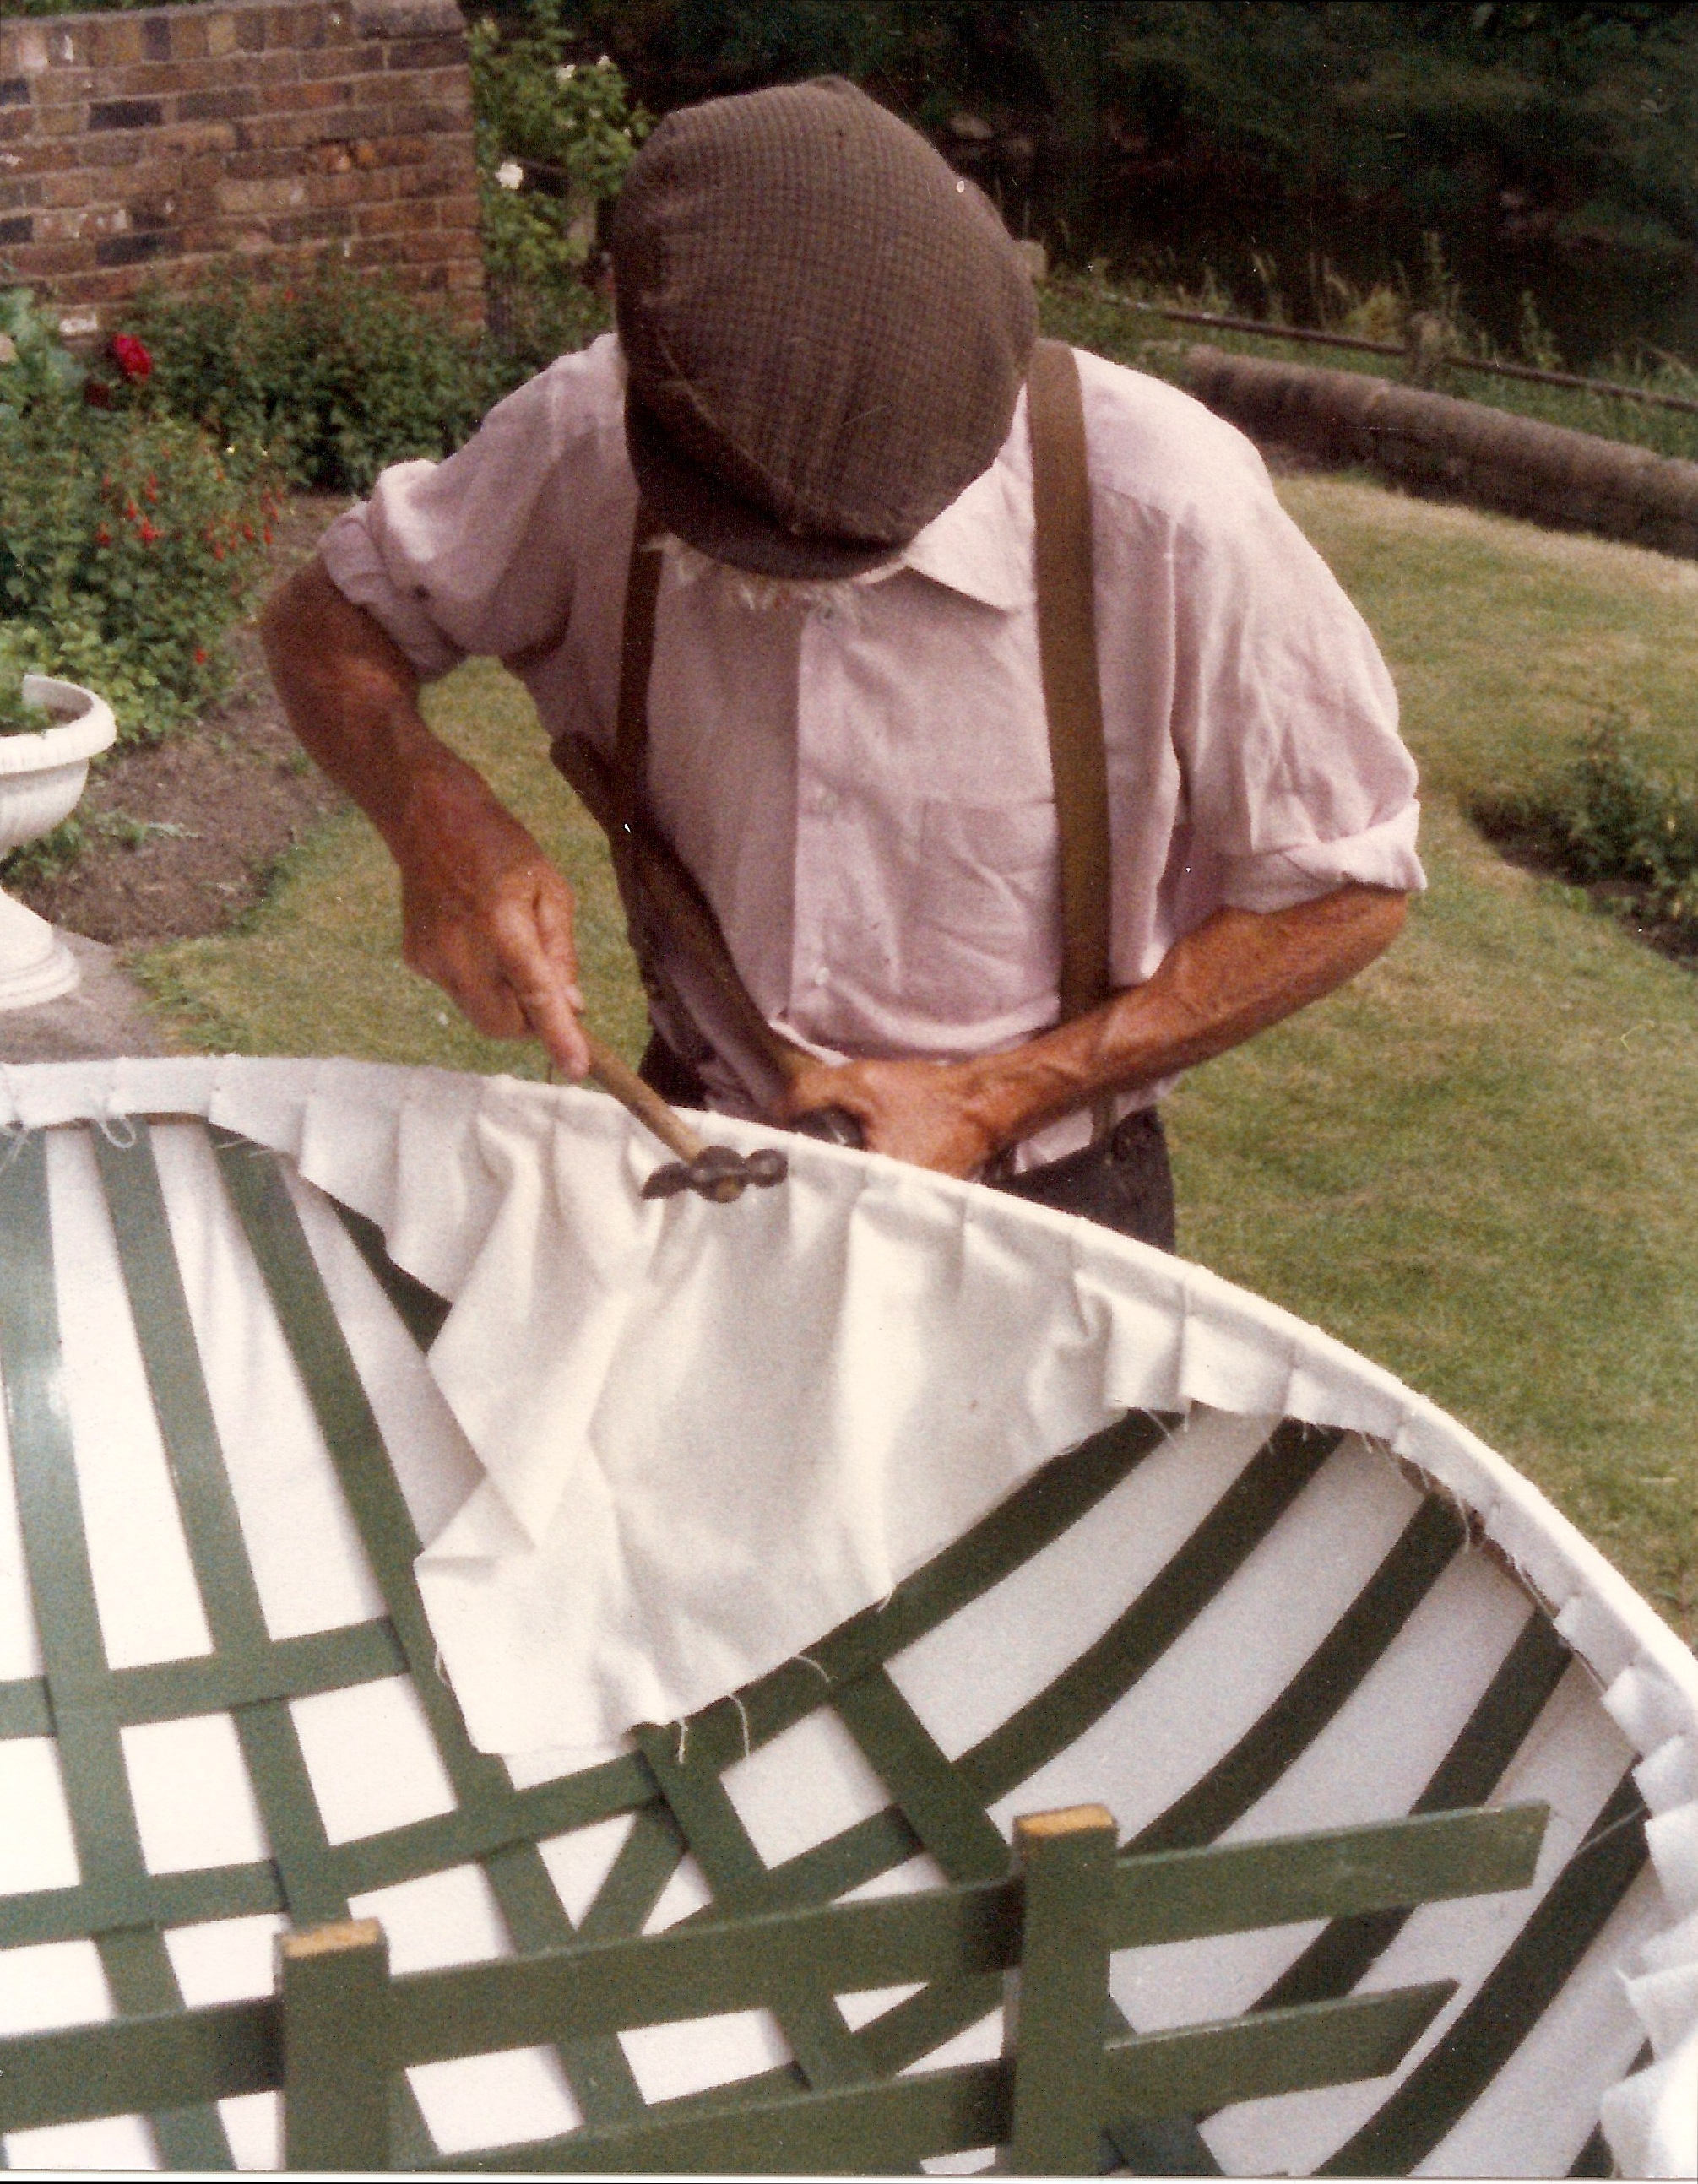 Eustace Rogers constructing an Ironbridge coracle in 1986